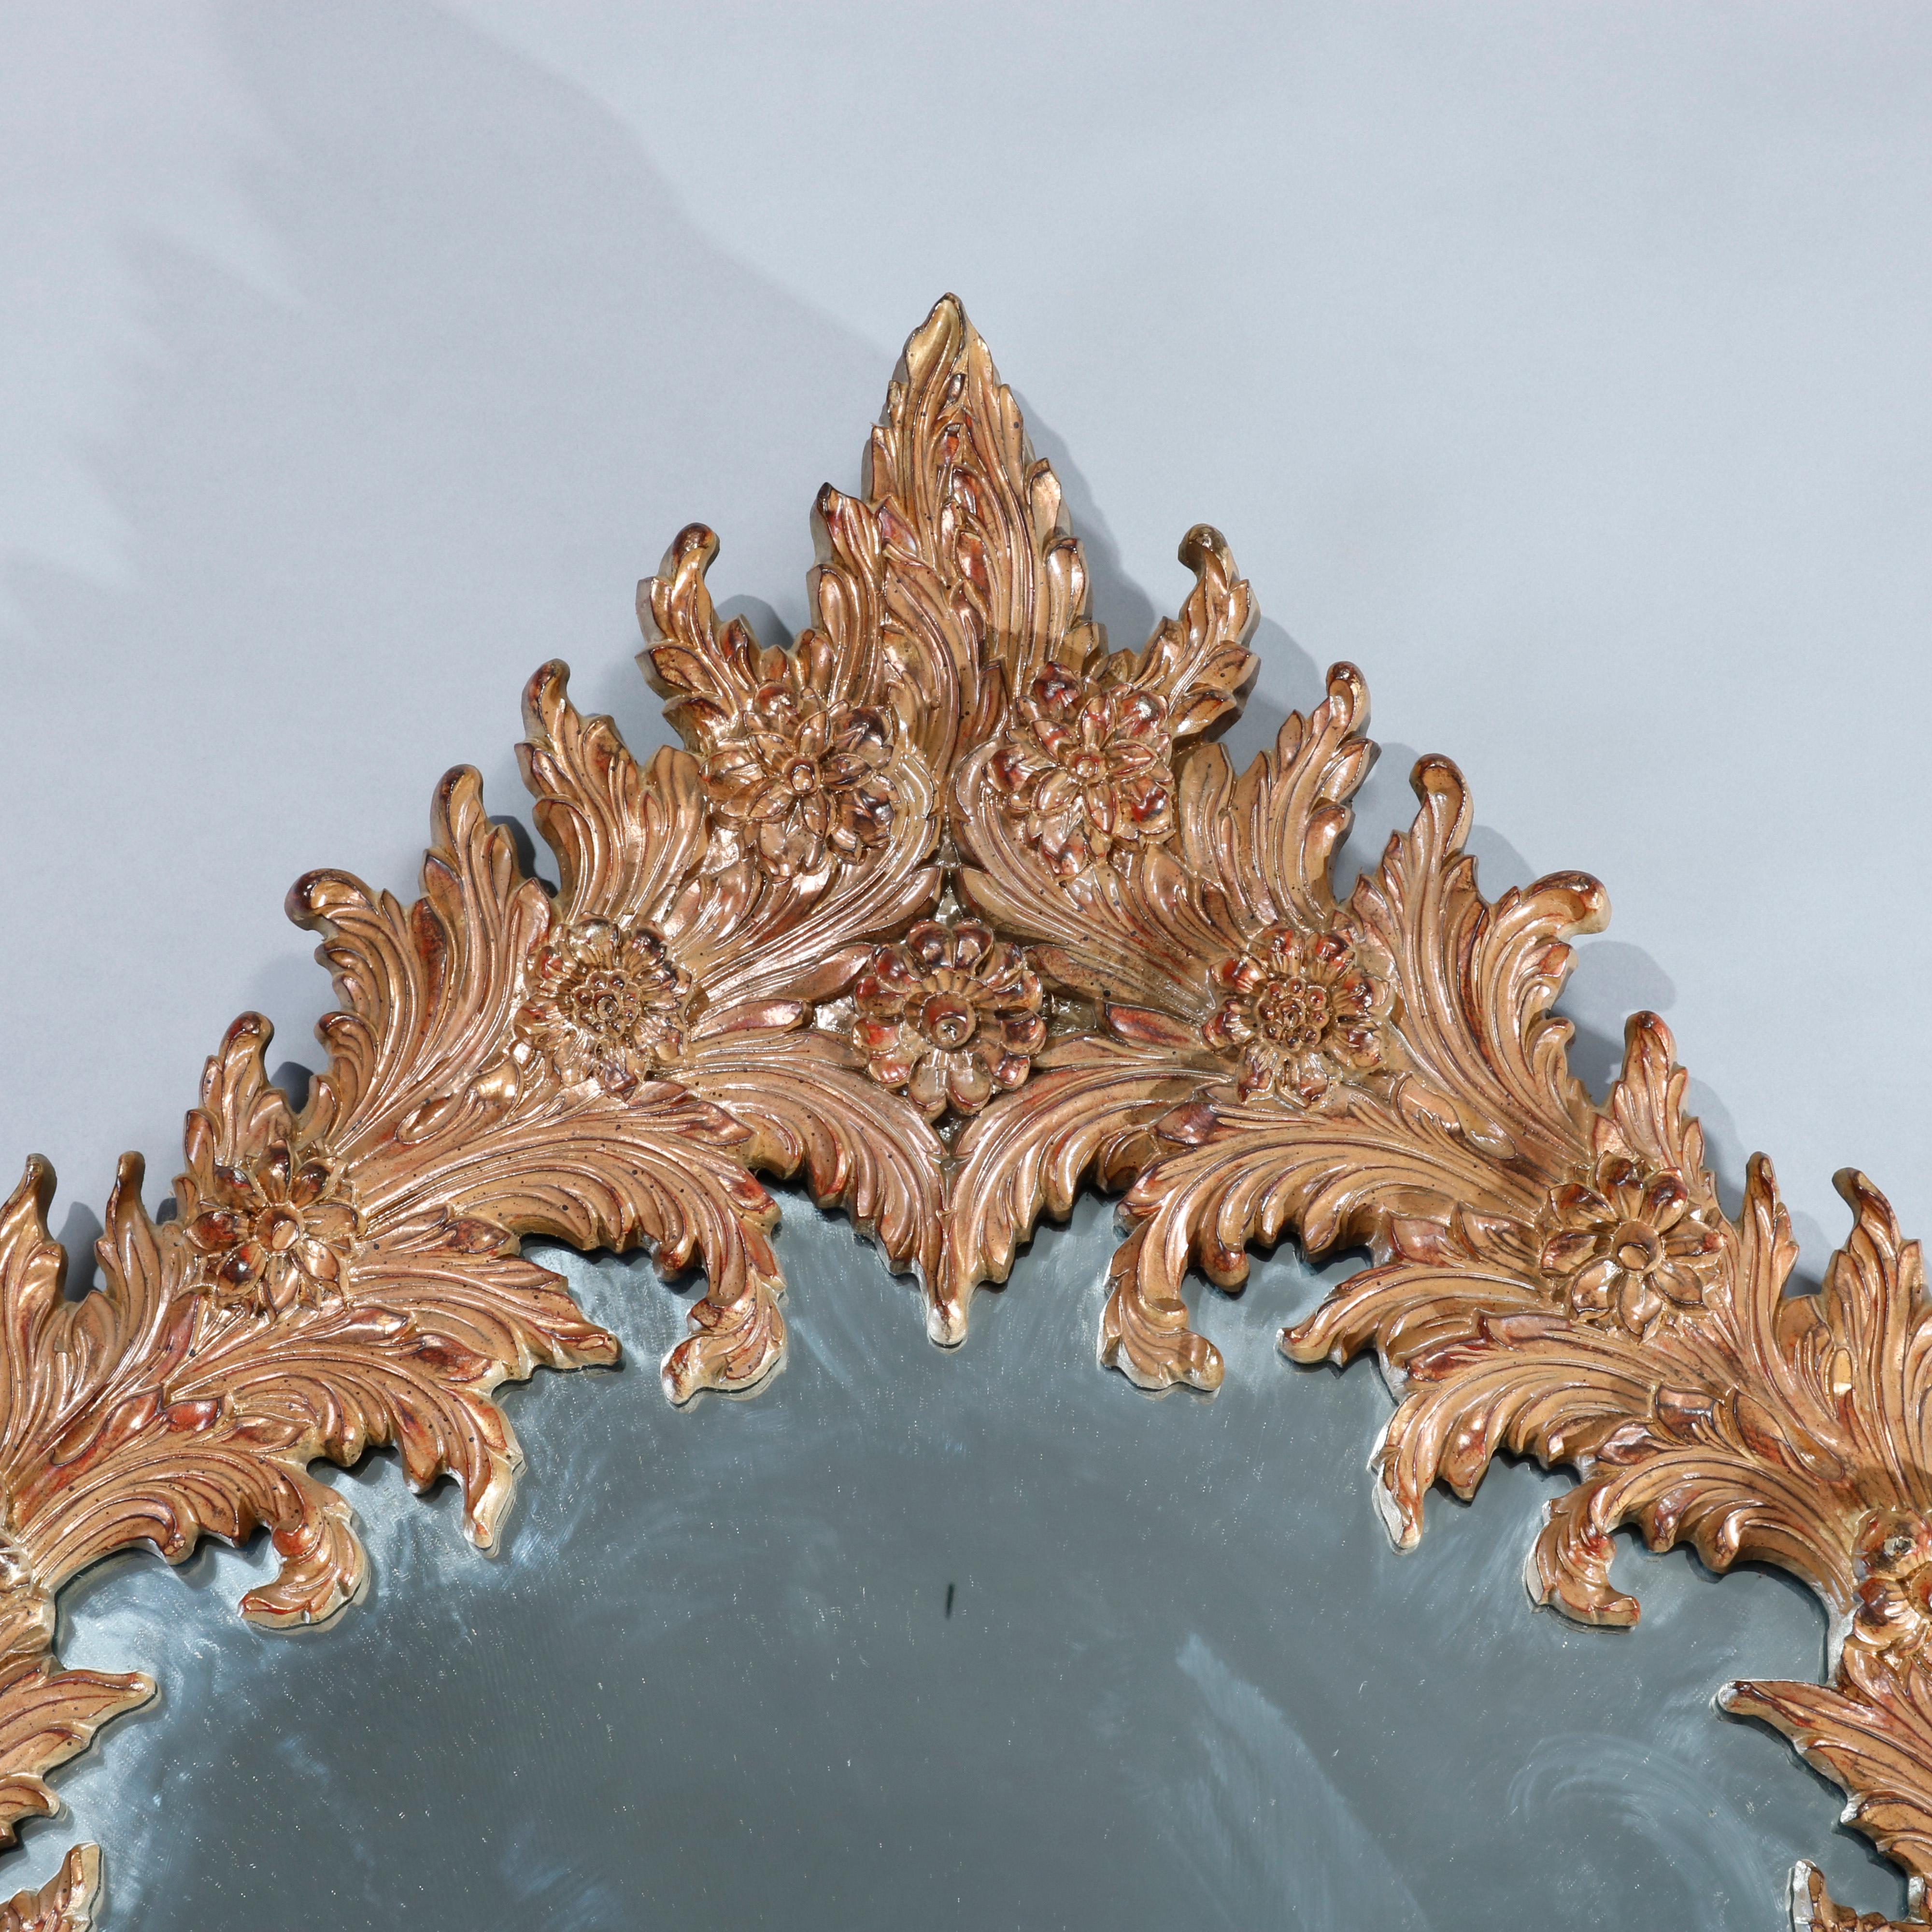 An antique and large French Rococo wall mirror offers oval giltwood foliate and floral form frame, 20th century

Measures: 52